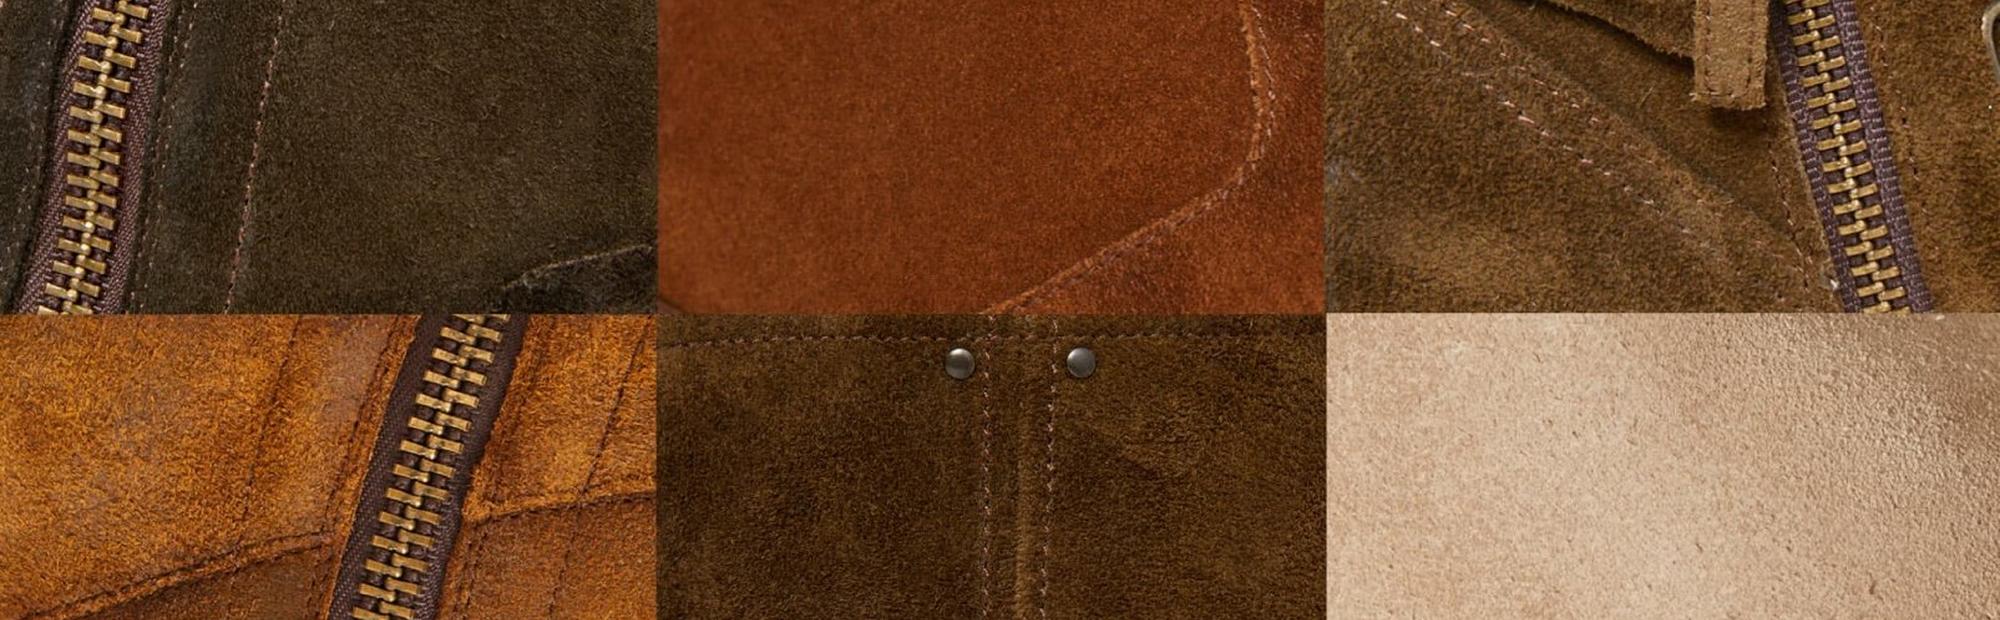 how to clean suede leather